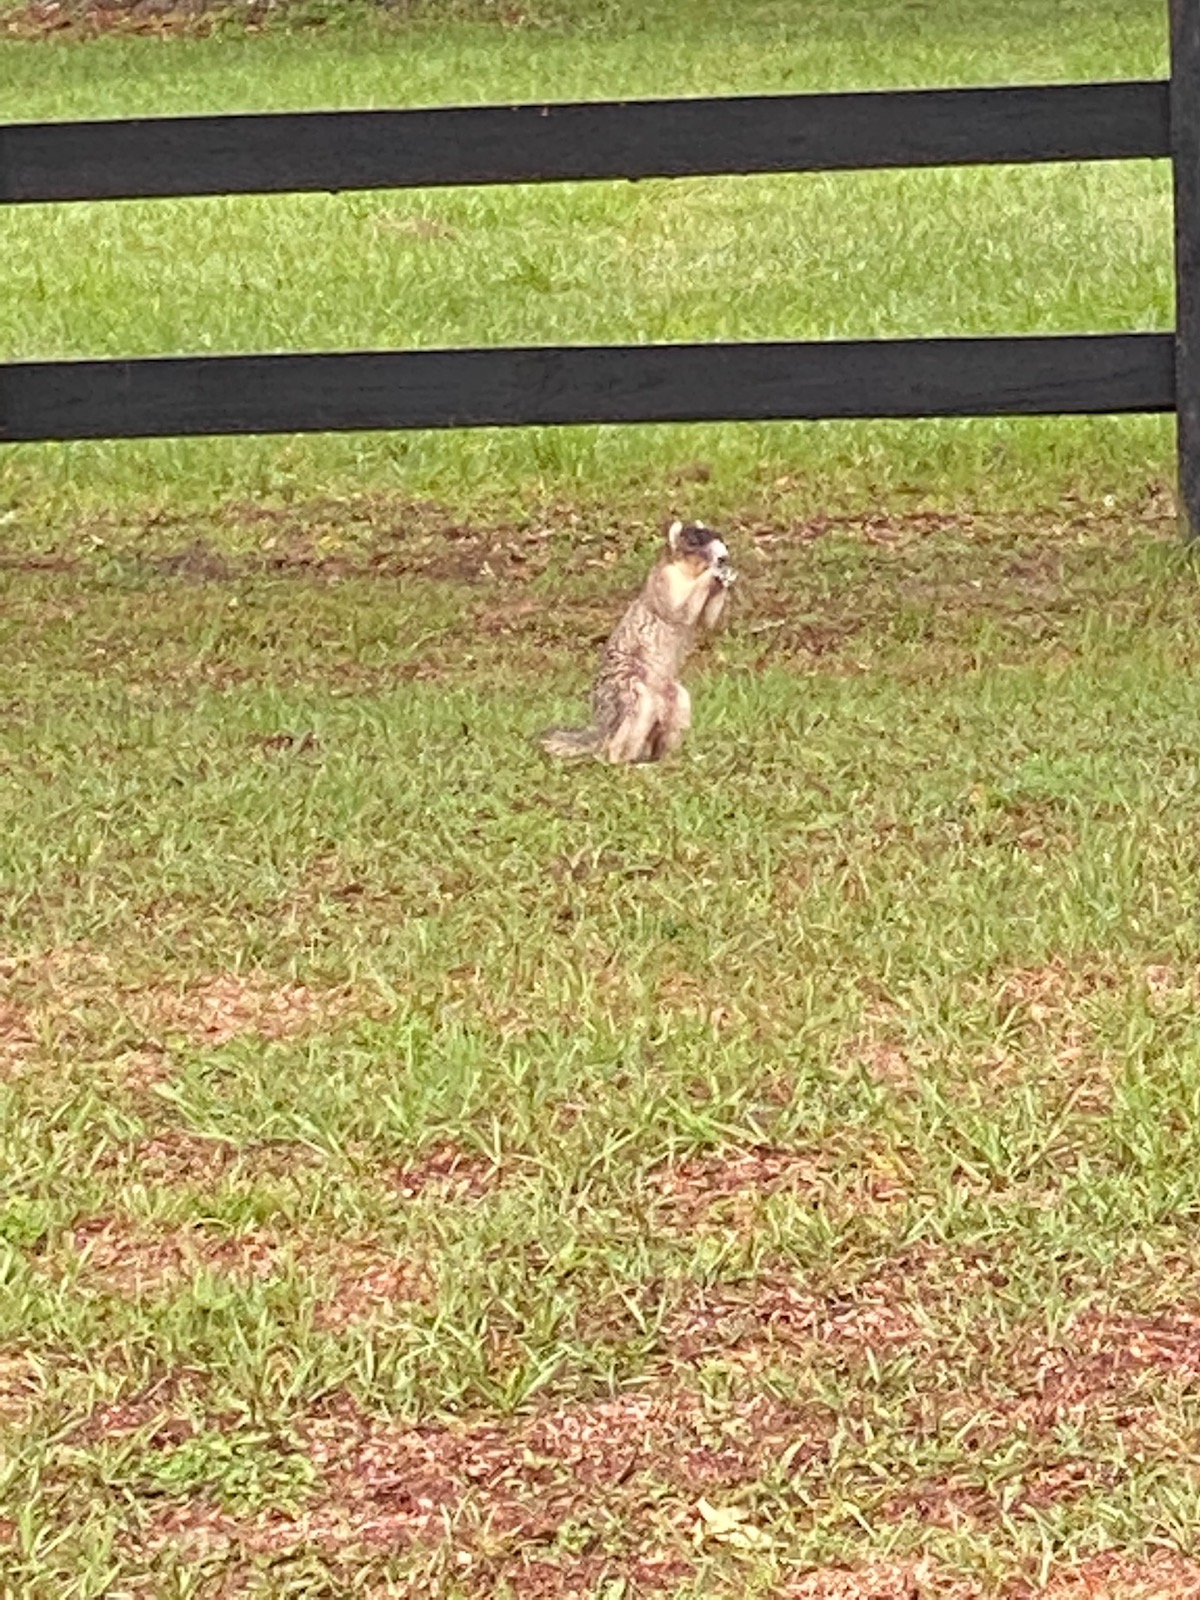 Dinner time for squirrel at Double Diamond Farm in Ocala